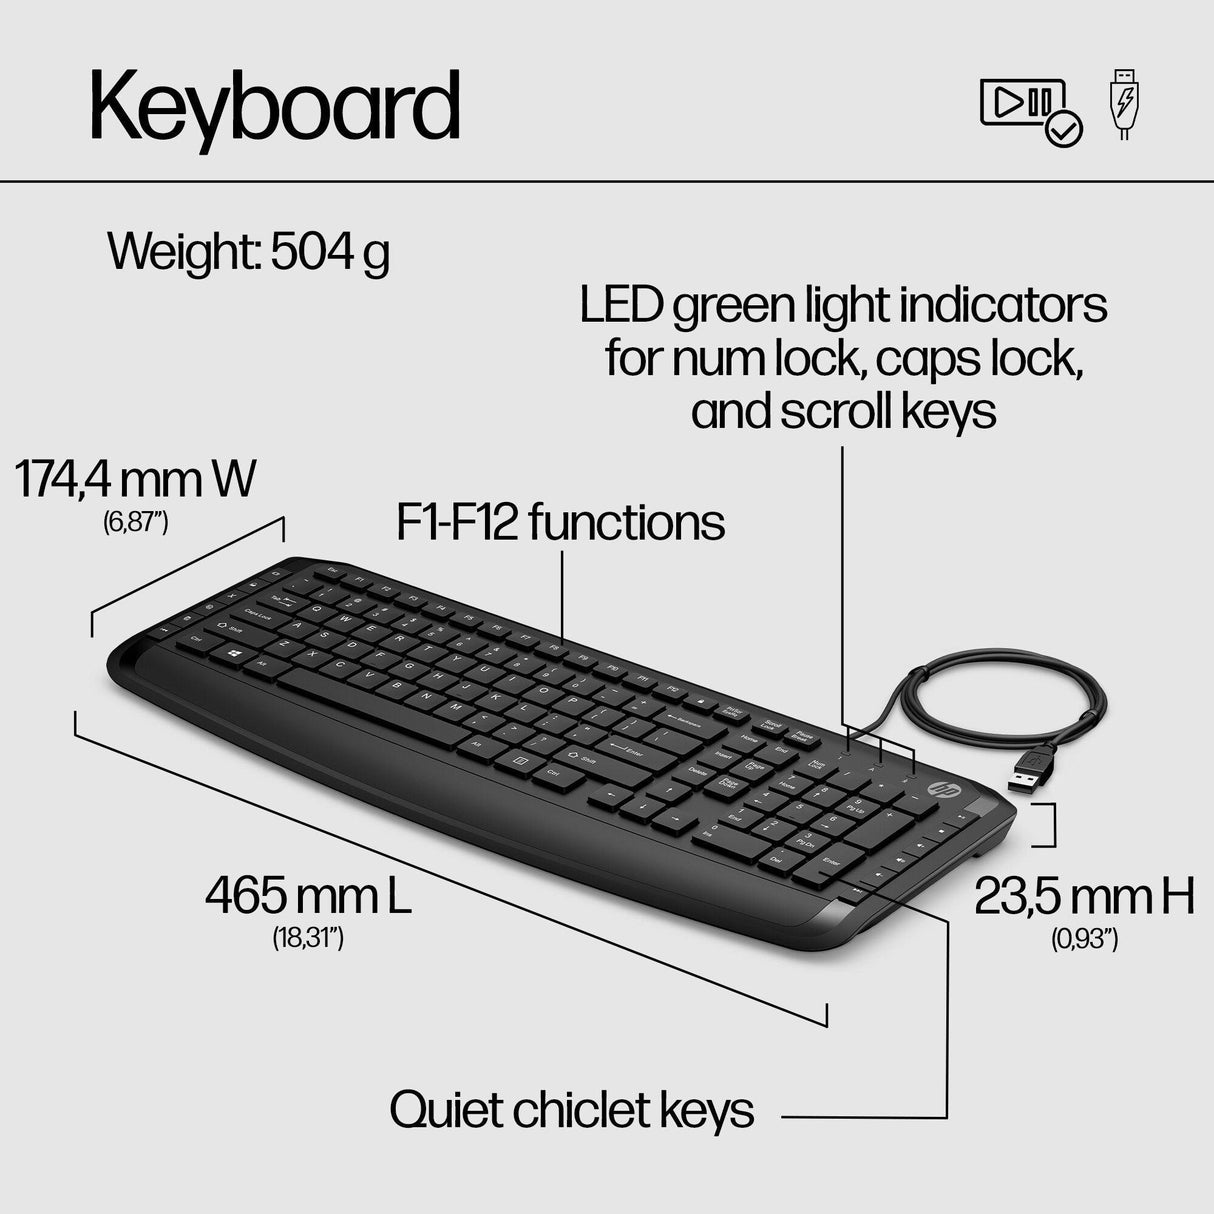 HP Pavilion Keyboard and Mouse 200 (9DF28AA) HP